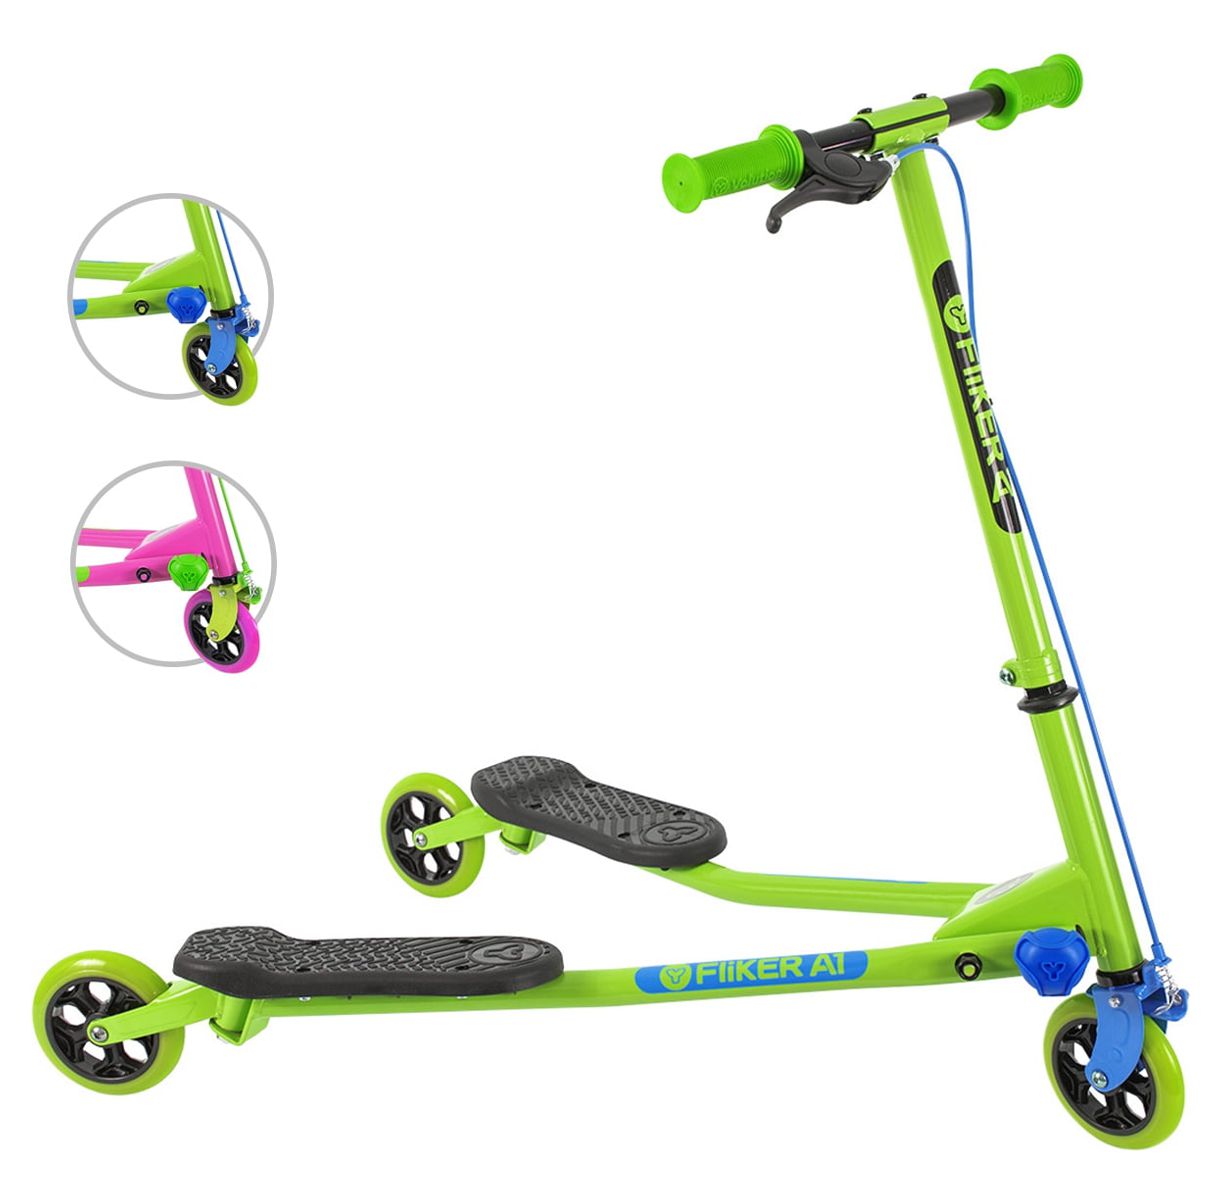 Yvolution Y Fliker Air A1 | 3 Wheel Drift Scooter for Kids Child 5-8 Years Old (Green) Unisex - image 1 of 7